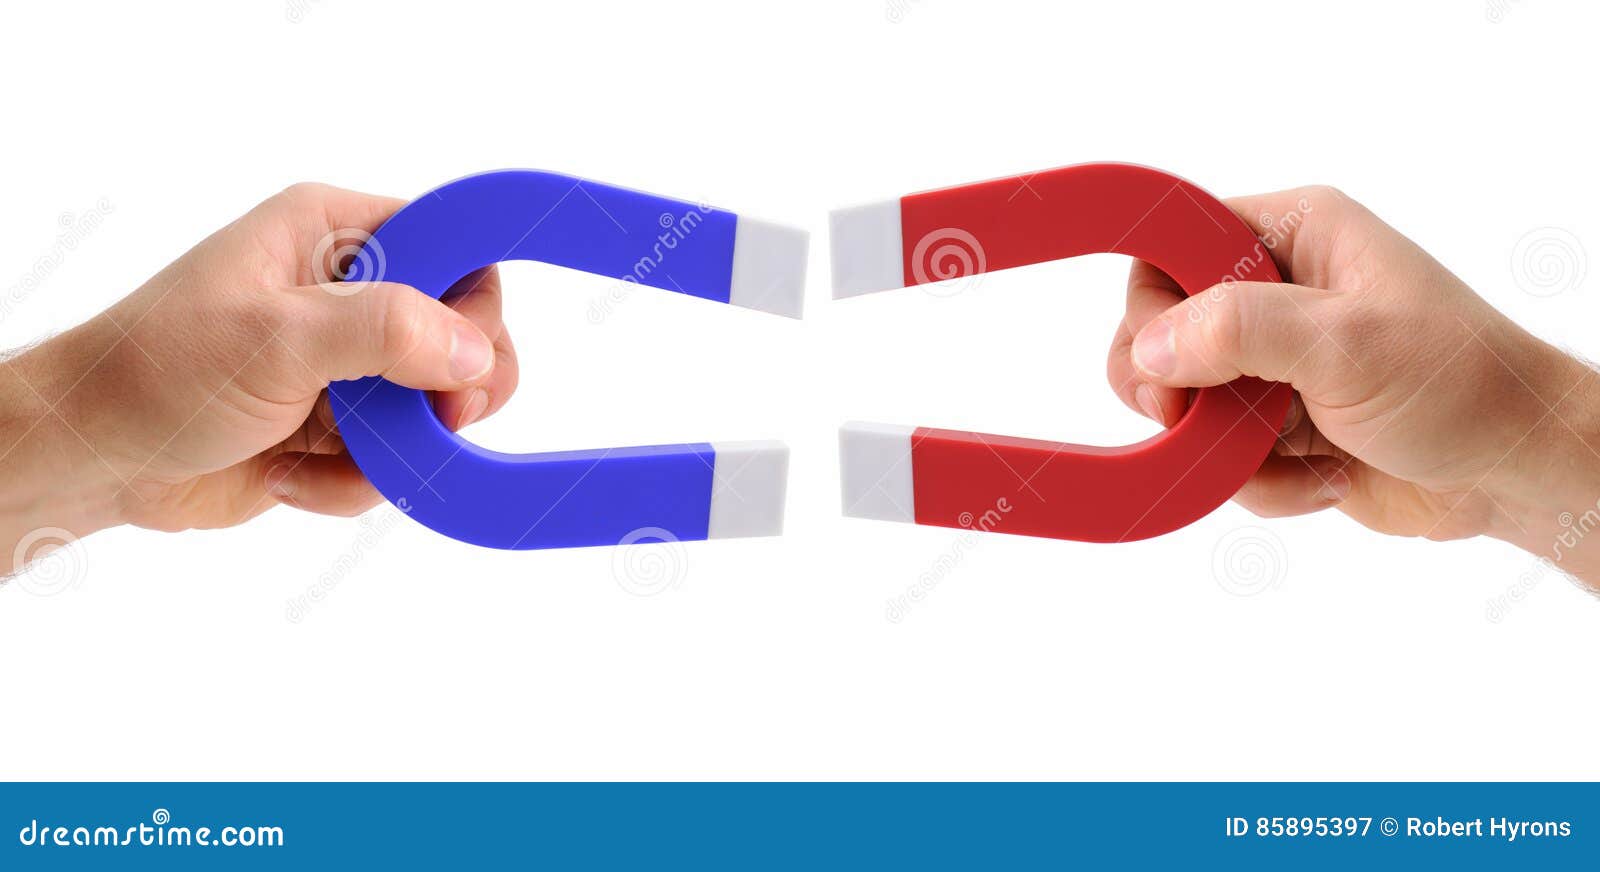 hands holding magnets one red and one blue